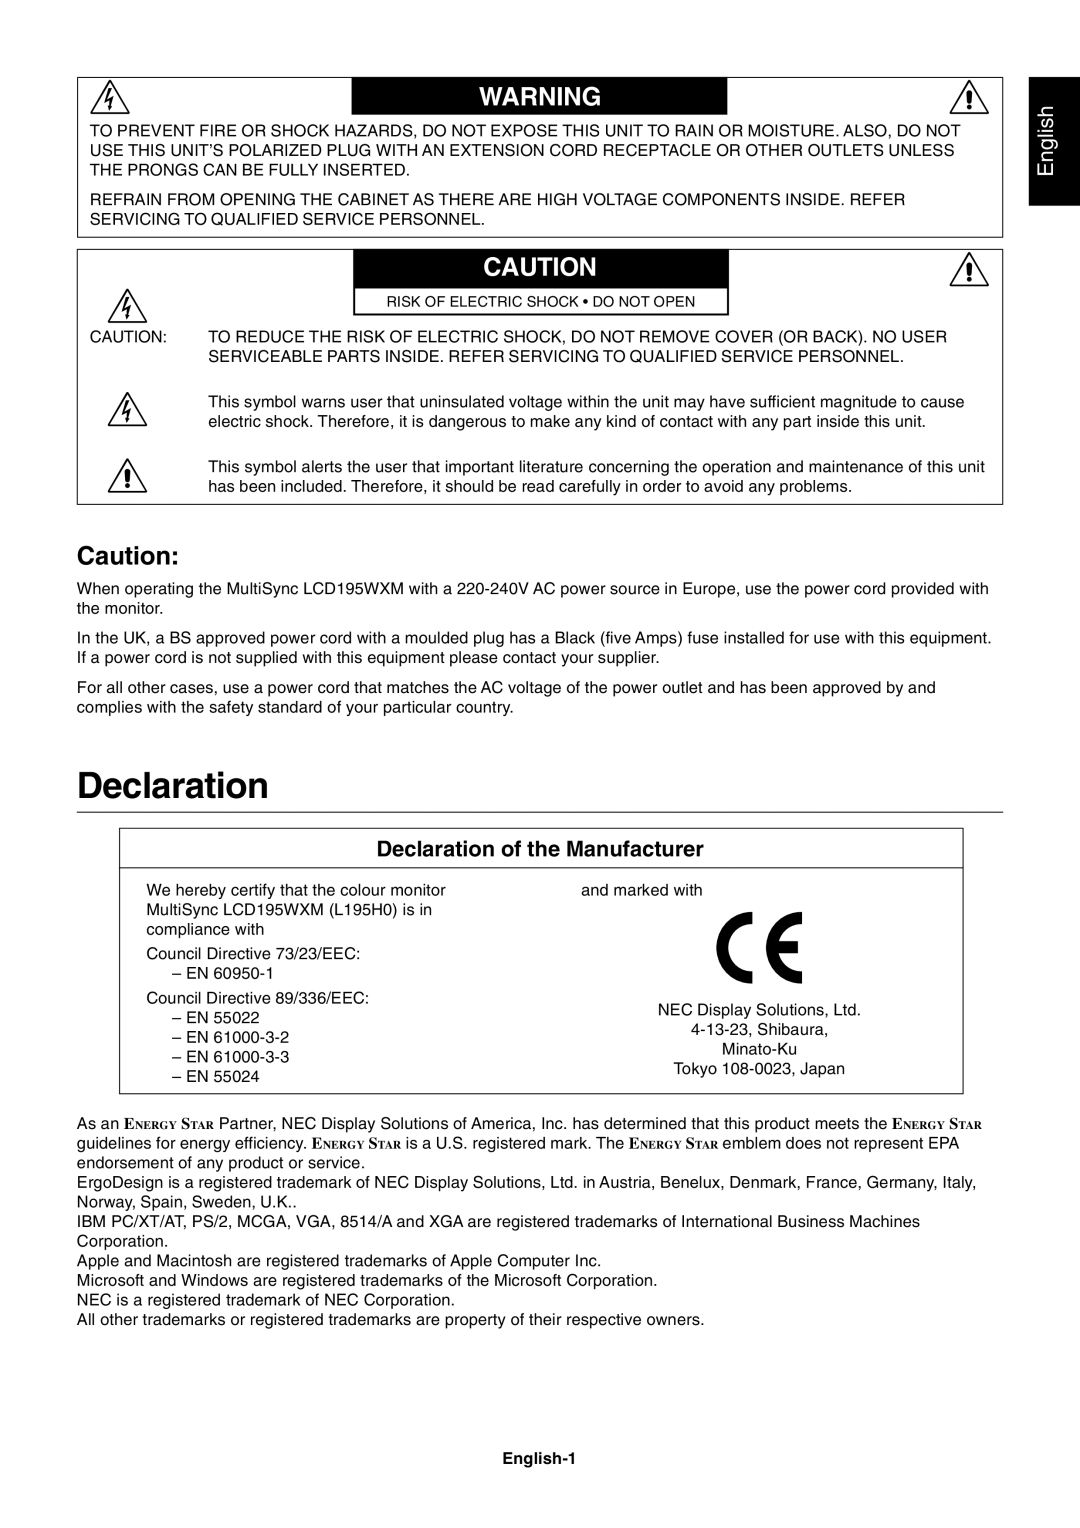 NEC LCD1970NX user manual English, Declaration of the Manufacturer 